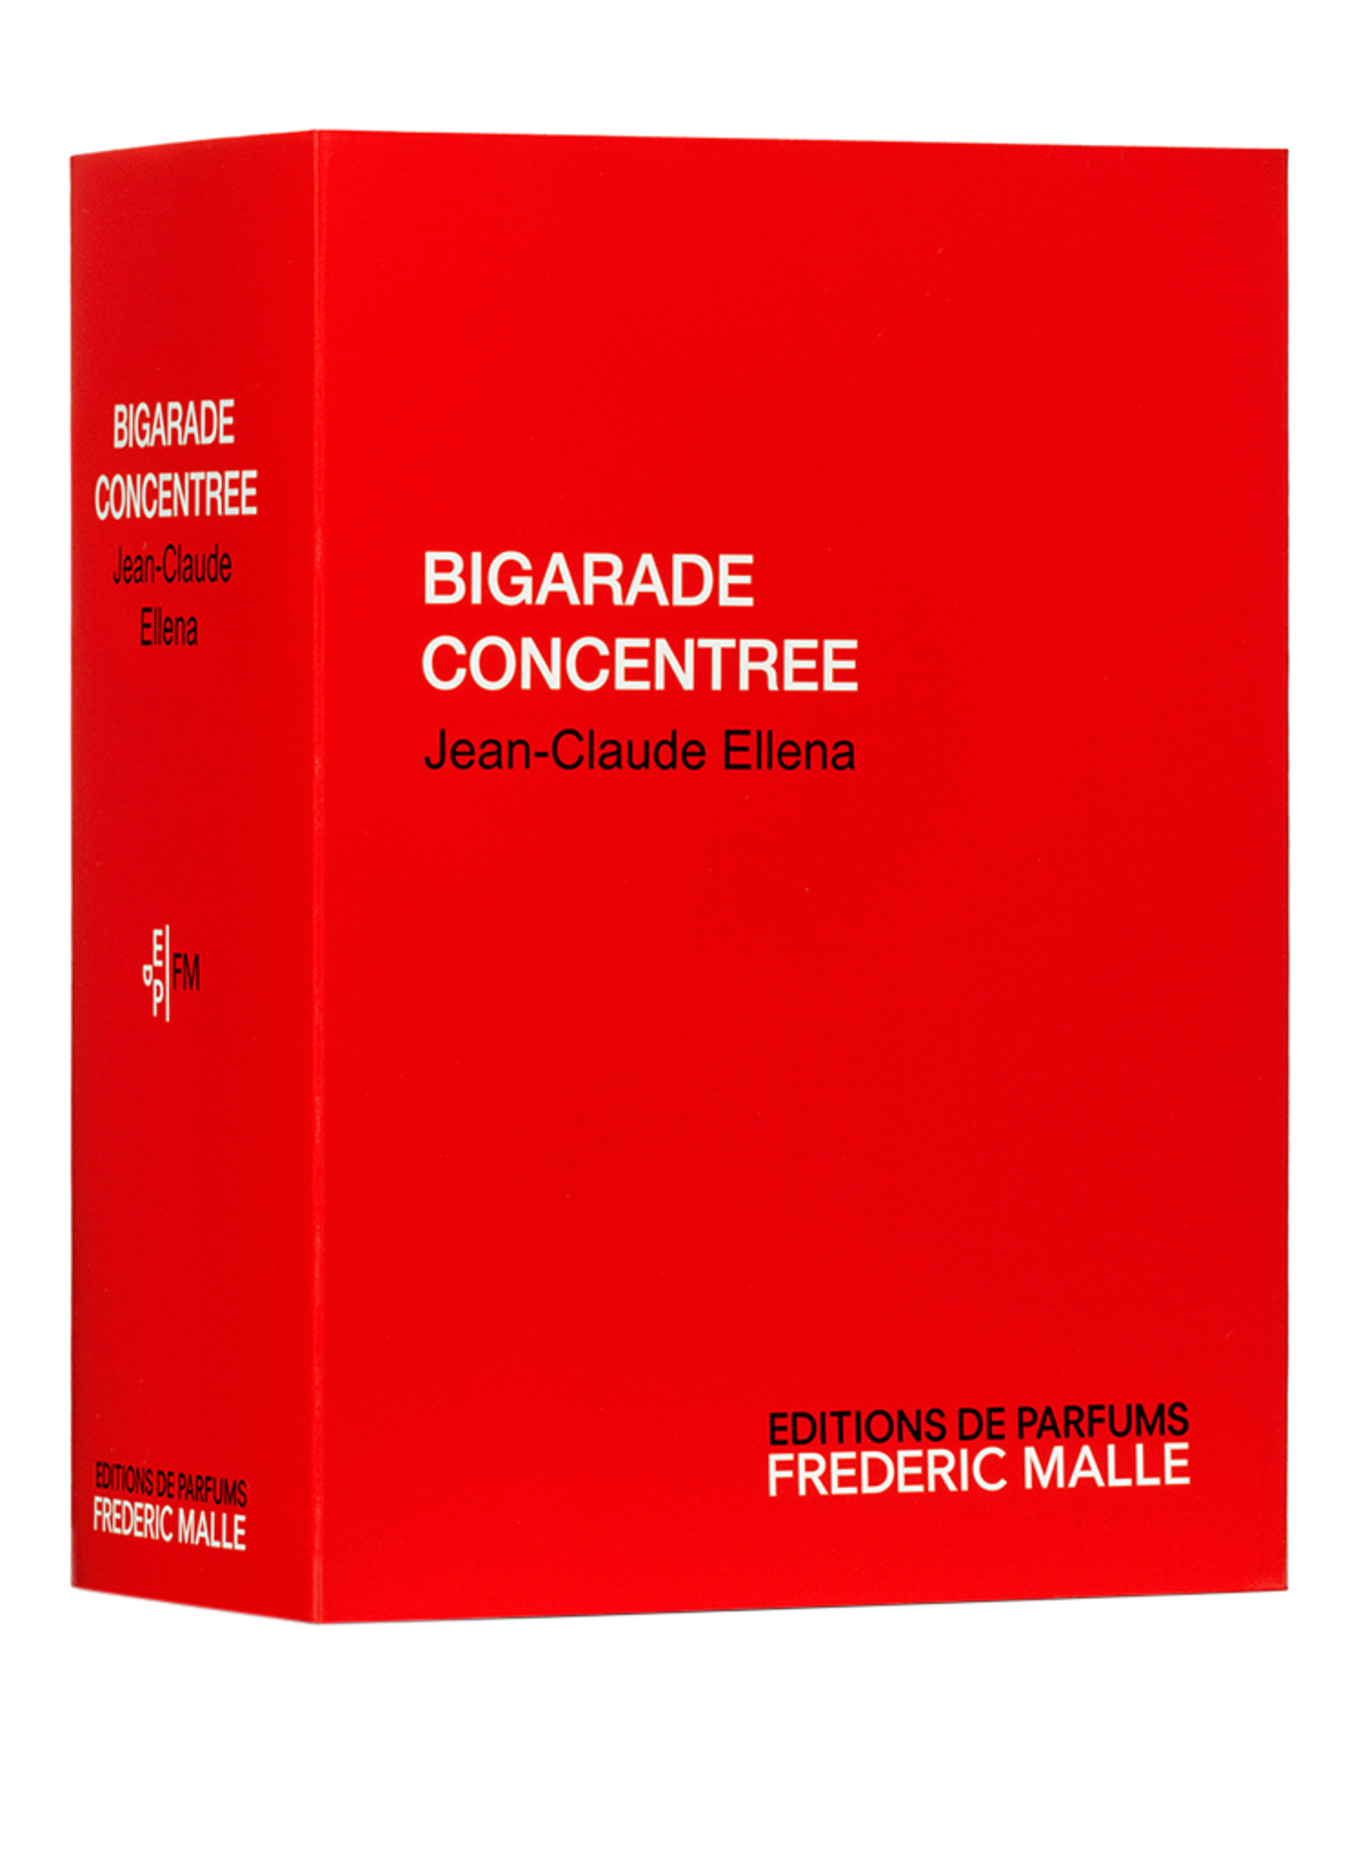 EDITIONS DE PARFUMS FREDERIC MALLE BIGARADE CONCENTREE (Obrazek 2)